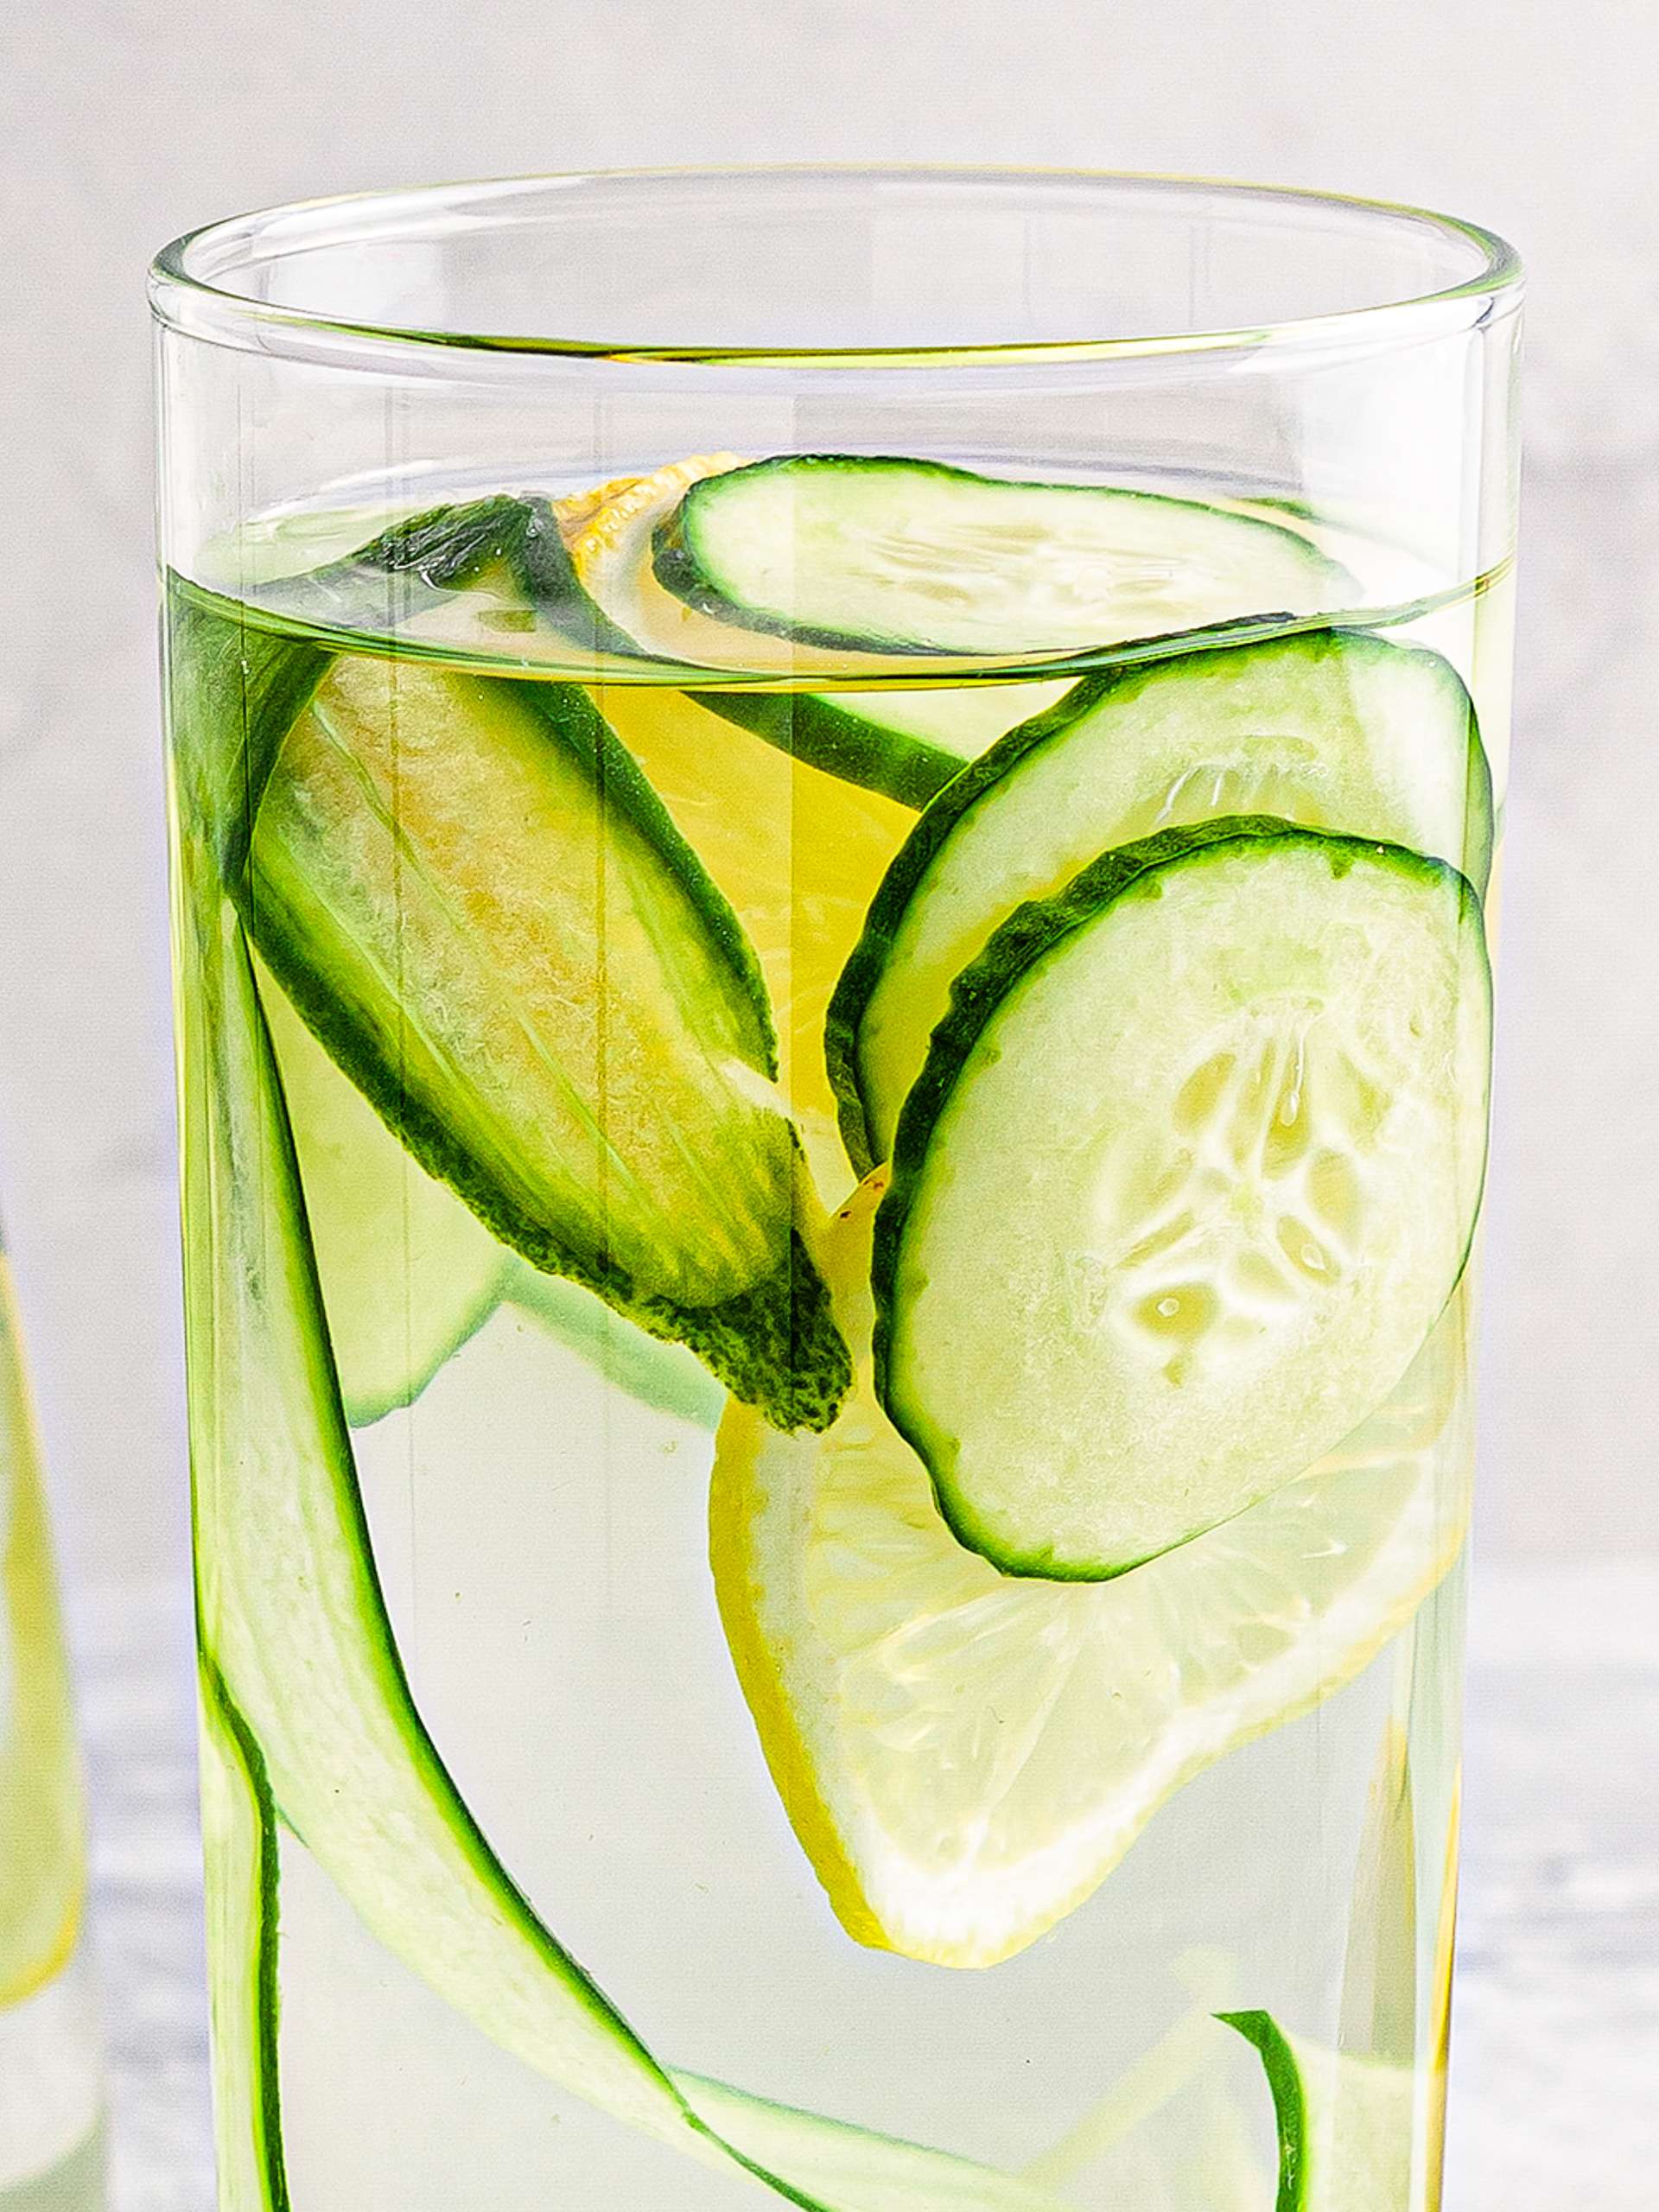 5 Cucumber Recipes For Detox & Weight Loss